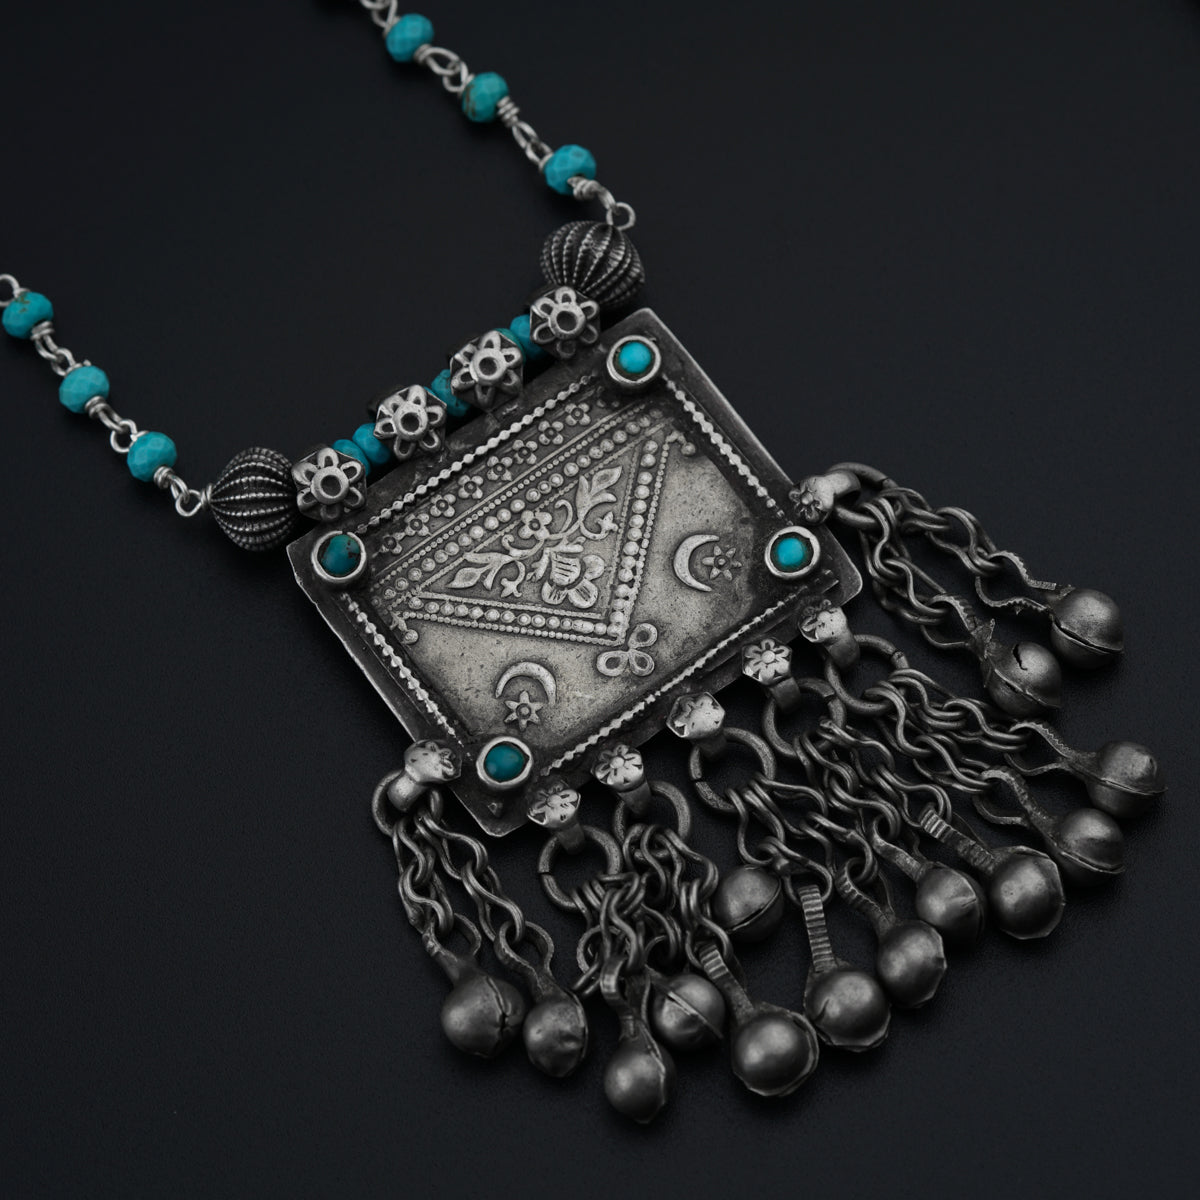 Antique Silver Necklace with Turquoise Beads